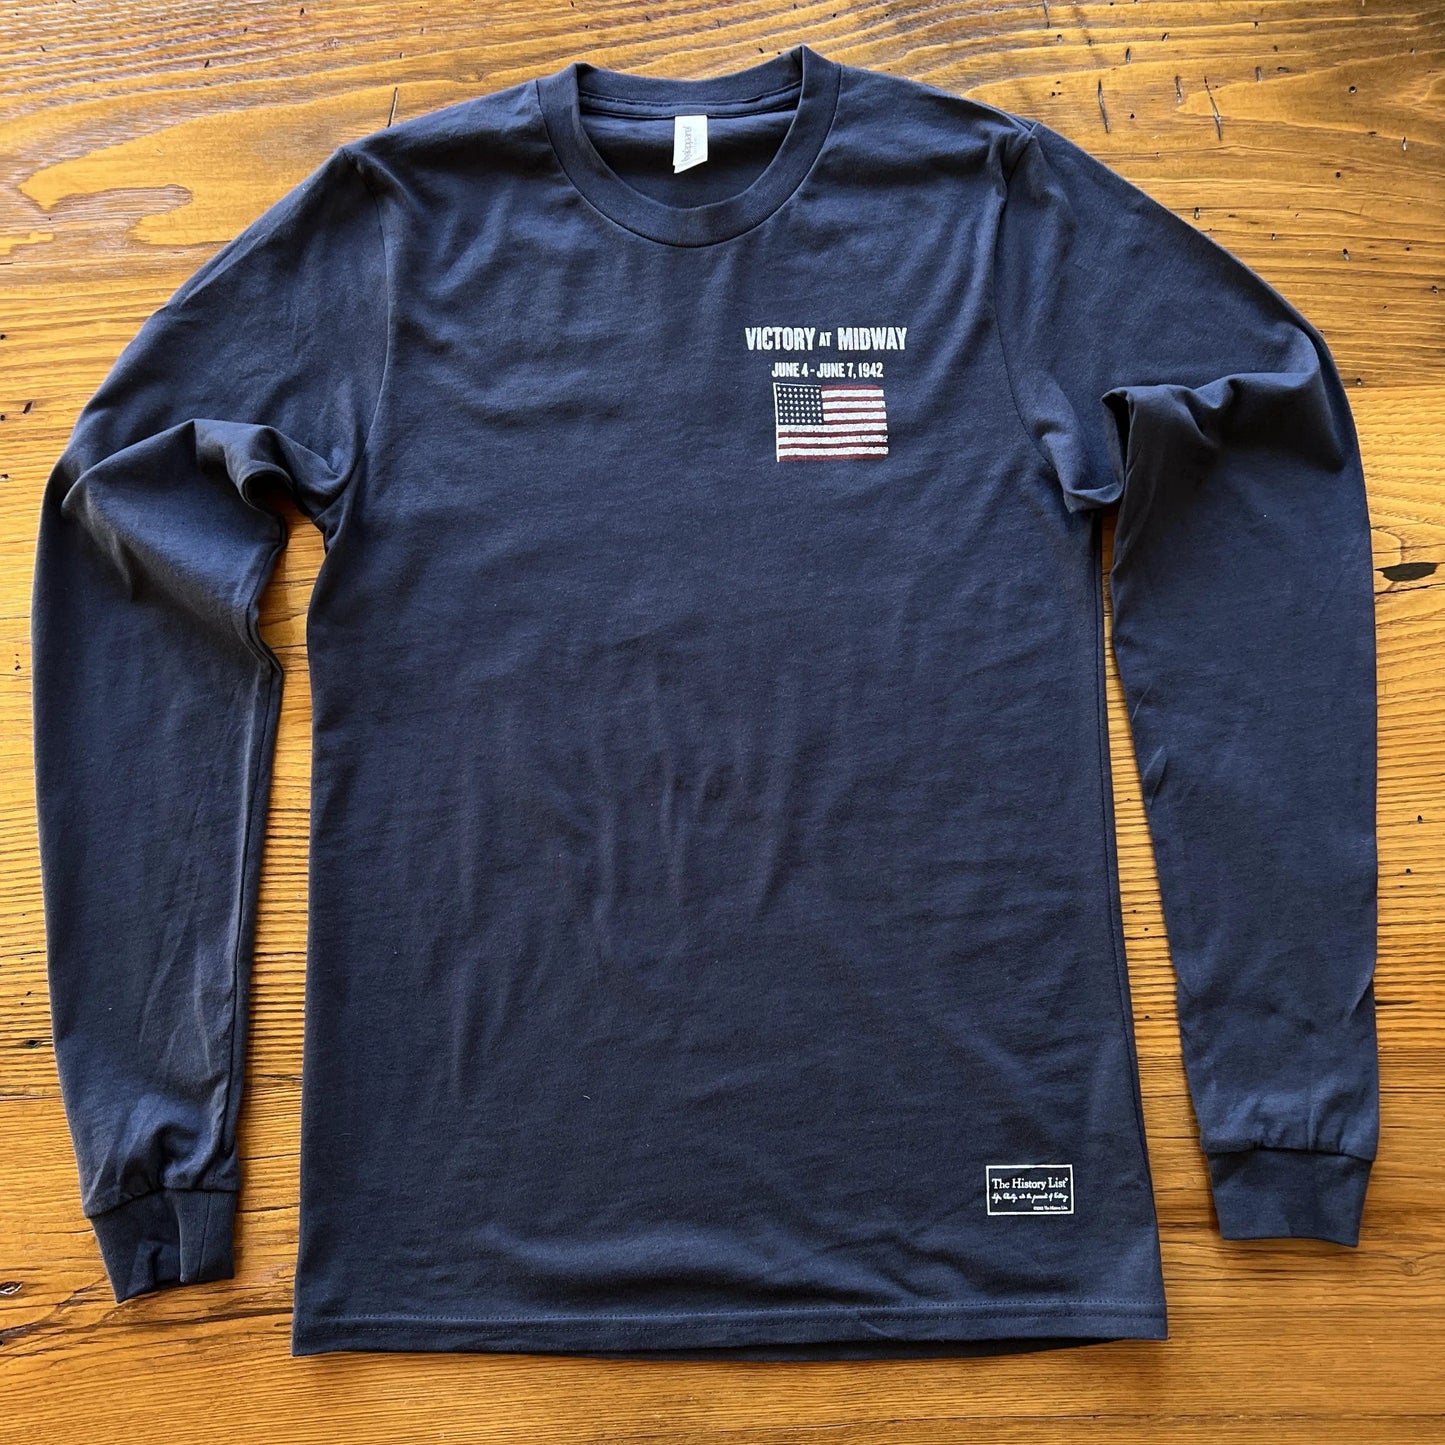 "Victory at Midway" made in America Long-sleeved Shirt